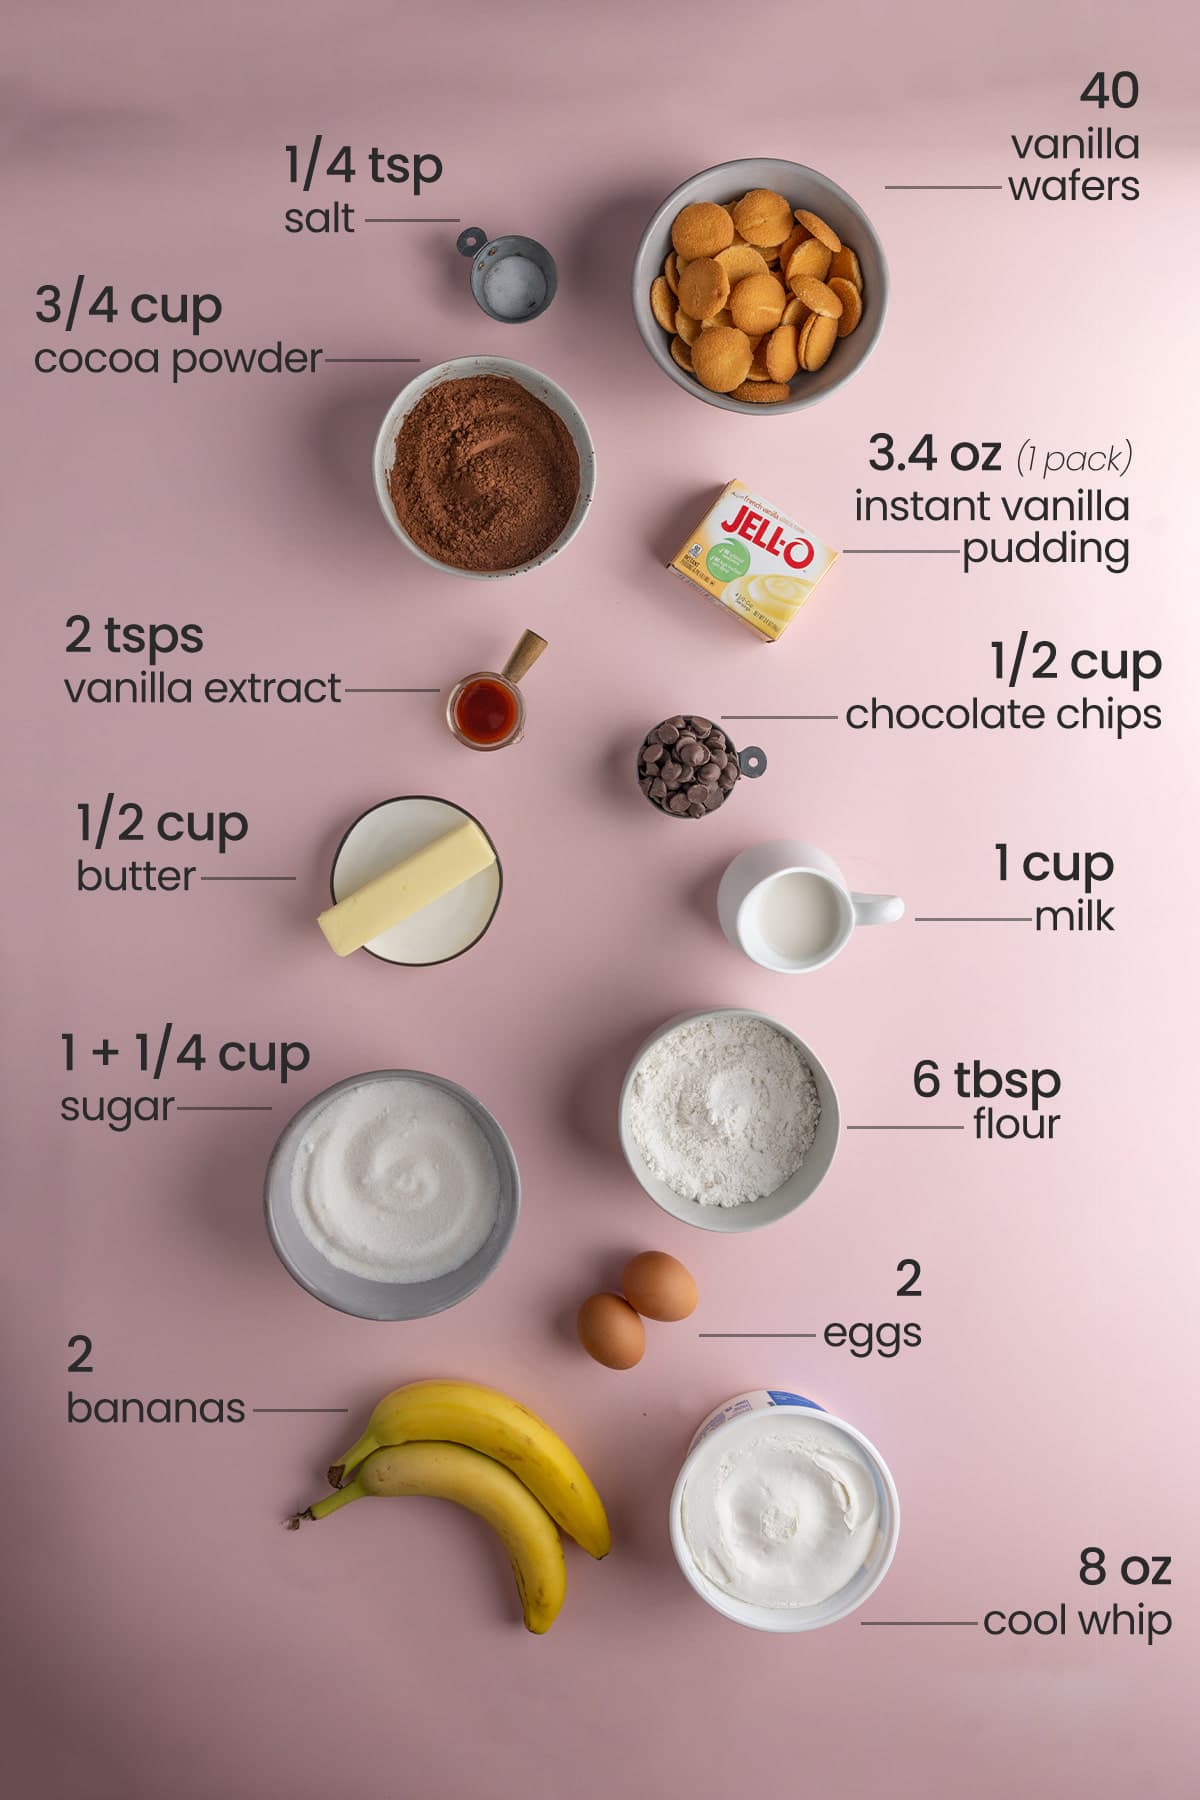 ingredients for banana pudding brownies - salt, vanilla wafers, cocoa powder, instant vanilla pudding, vanilla extract, chocolate chips, butter, milk, sugar, flour, eggs, bananas, cool whip